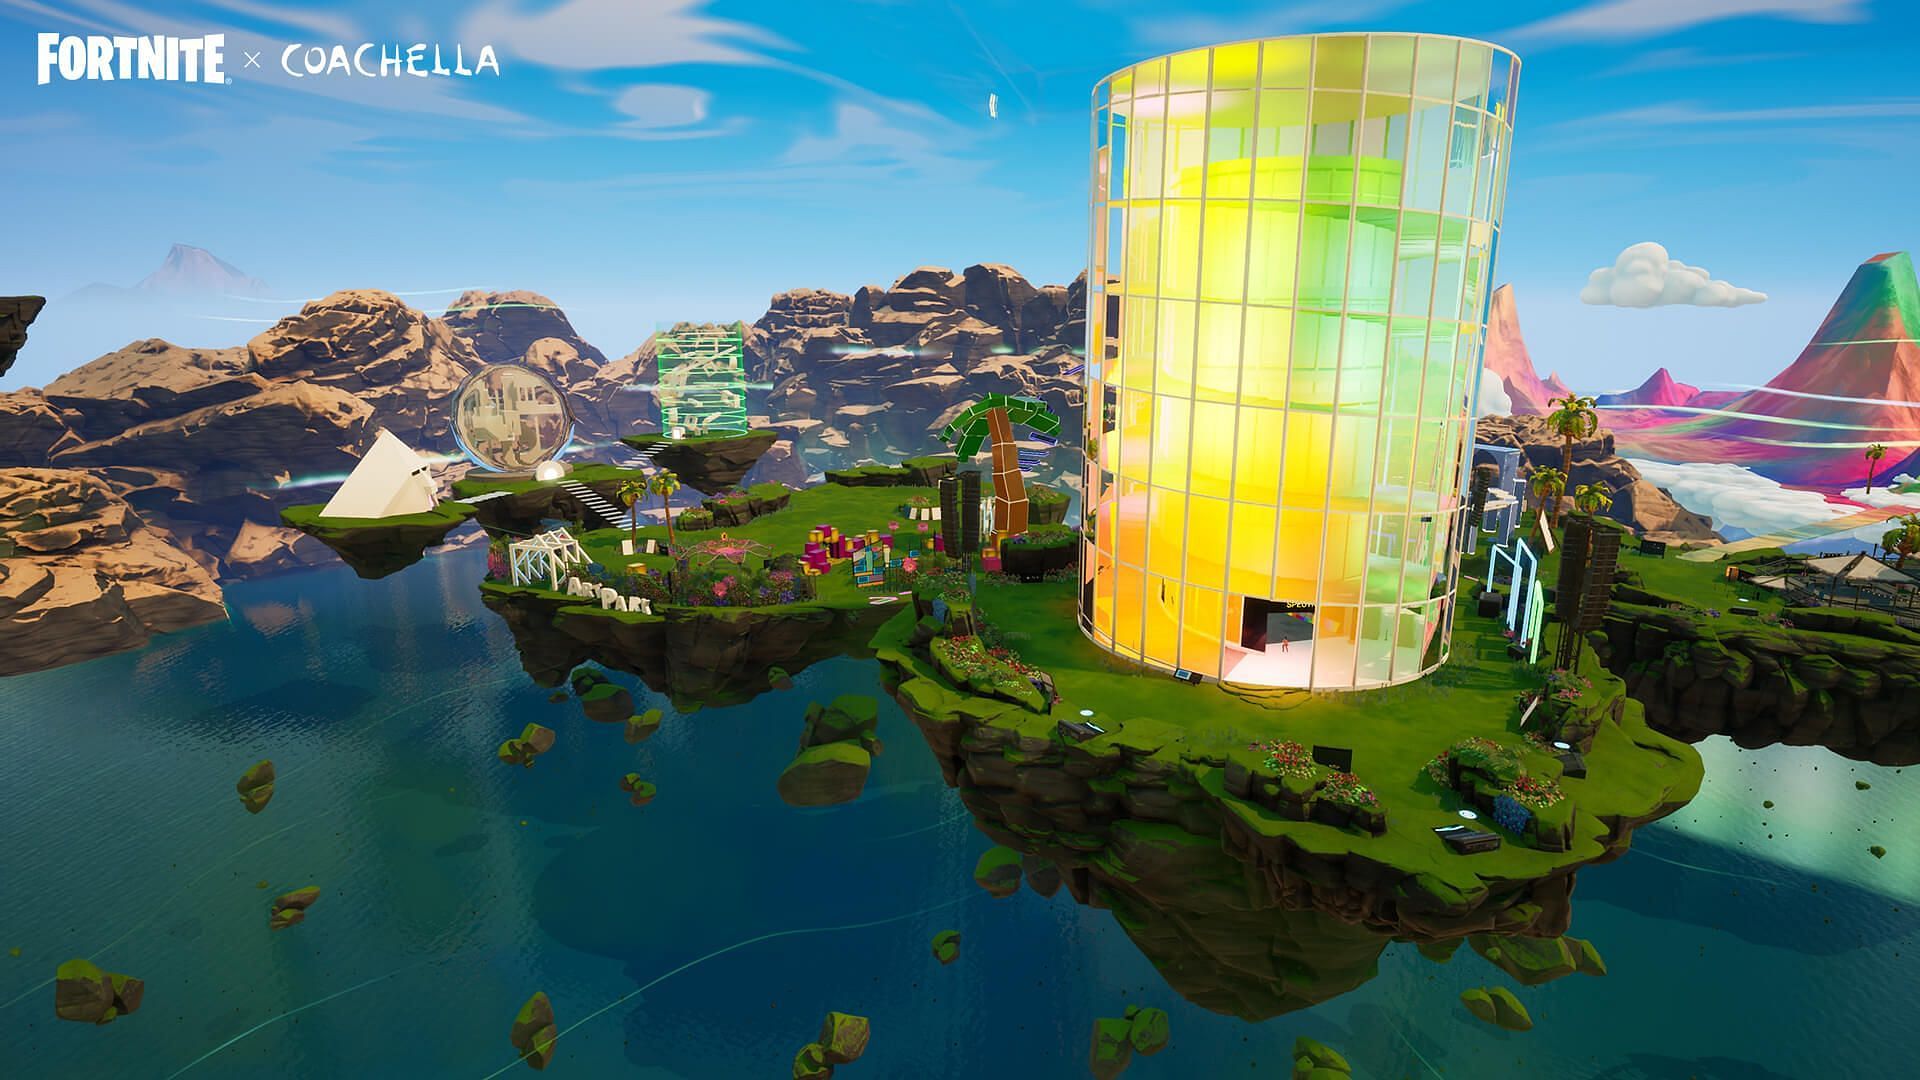 The Coachella island is available during the special Fortnite event (Image via Epic Games)